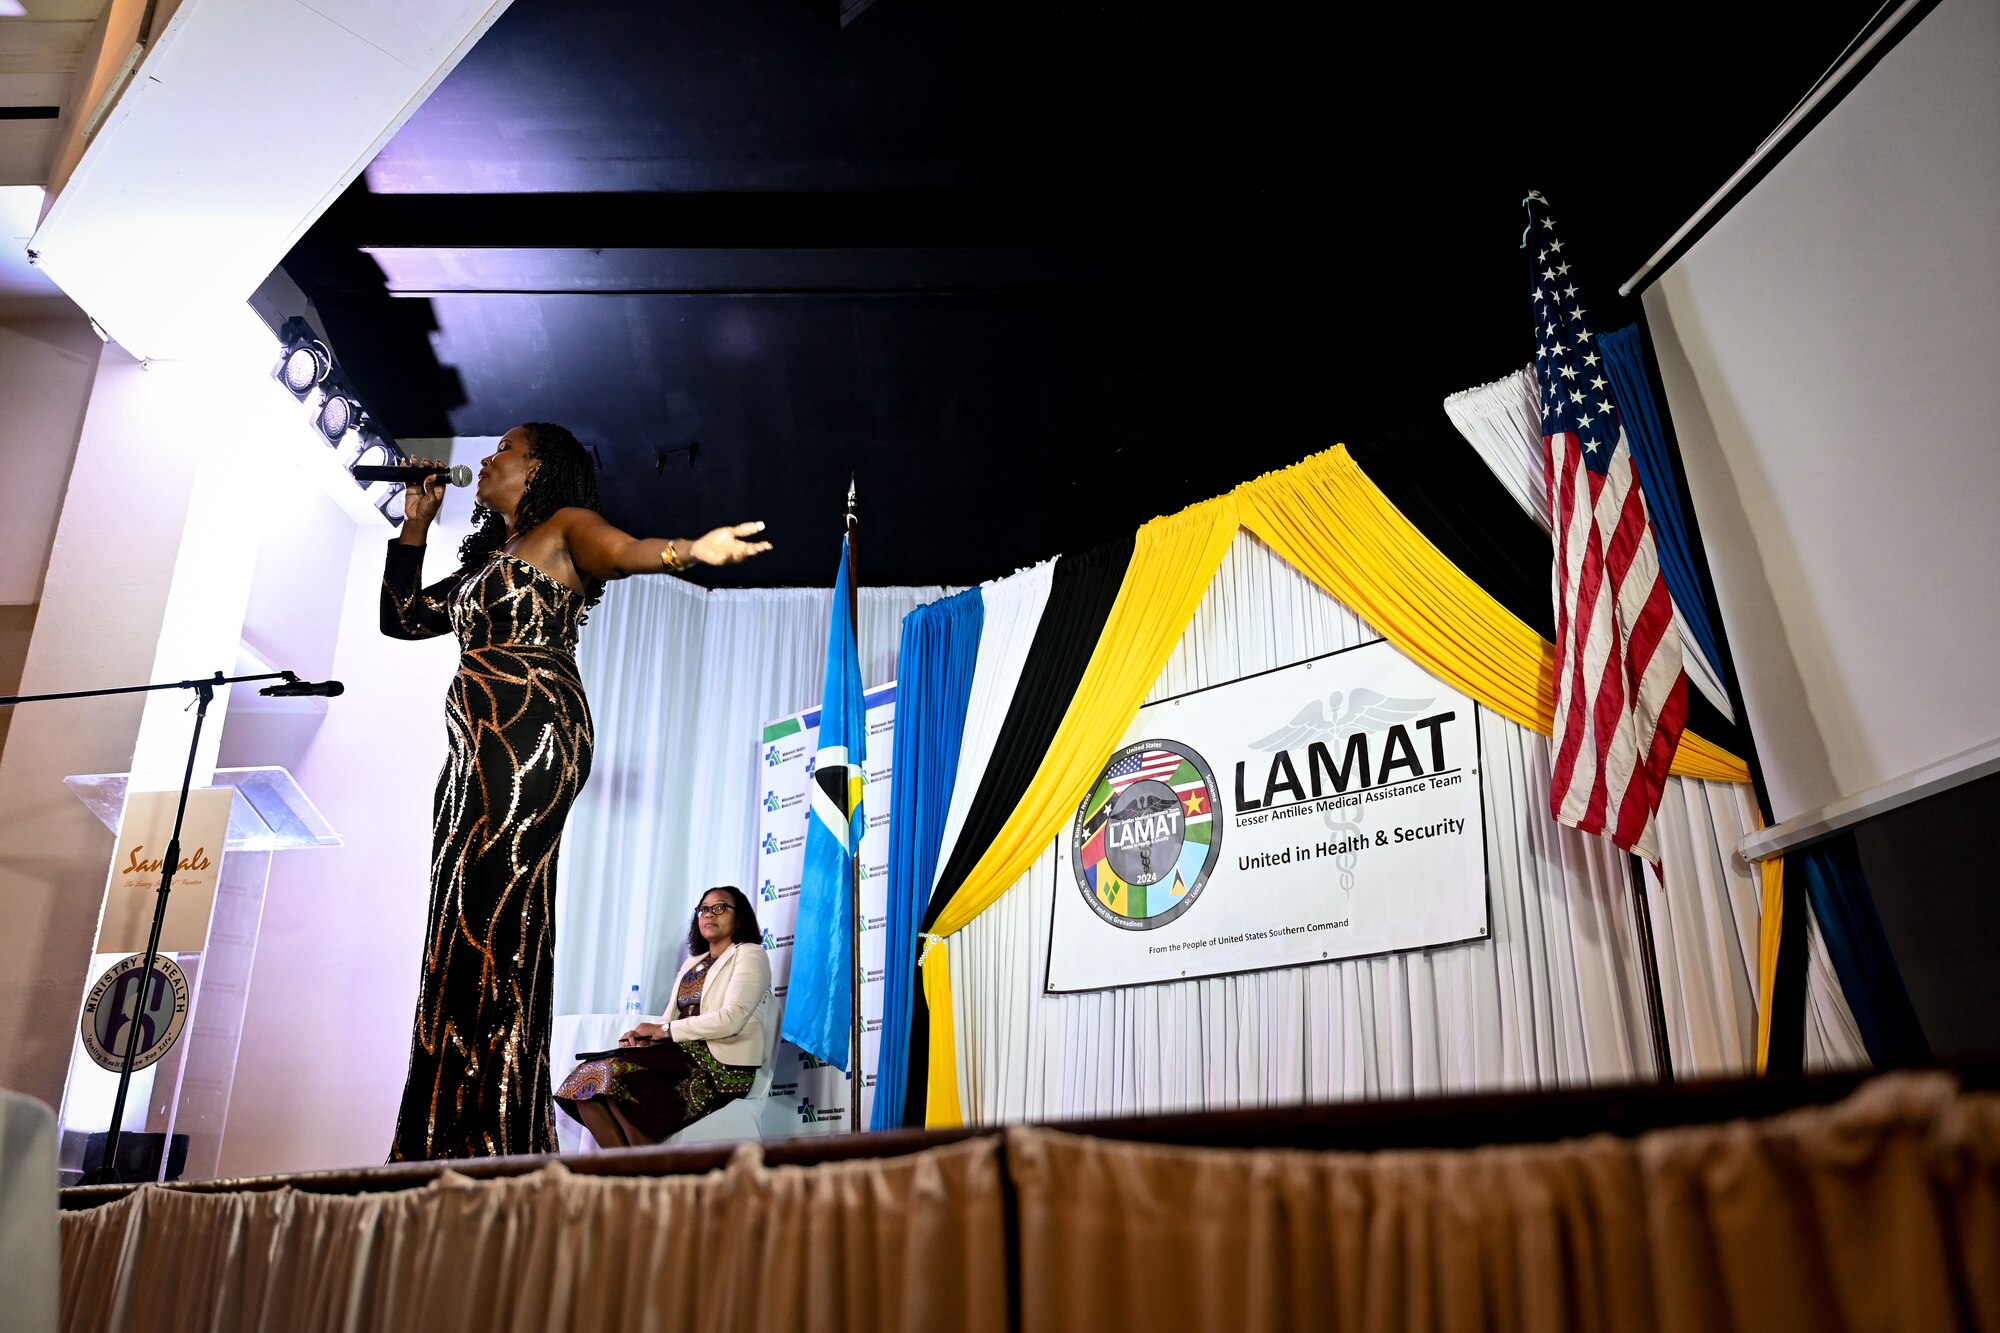 An Owen King European Union Hospital member sings a song during the closing ceremony for the Lesser Antilles Medical Assistance Team mission  in Castries, St. Lucia, March 6, 2024. The LAMAT mission is meant as an opportunity to provide mutual benefits to both the U.S. and St. Lucia through participation in health engagements, knowledge exchanges, and relationship-building. (U.S. Air Force photo by Staff Sgt. Madeline Herzog)